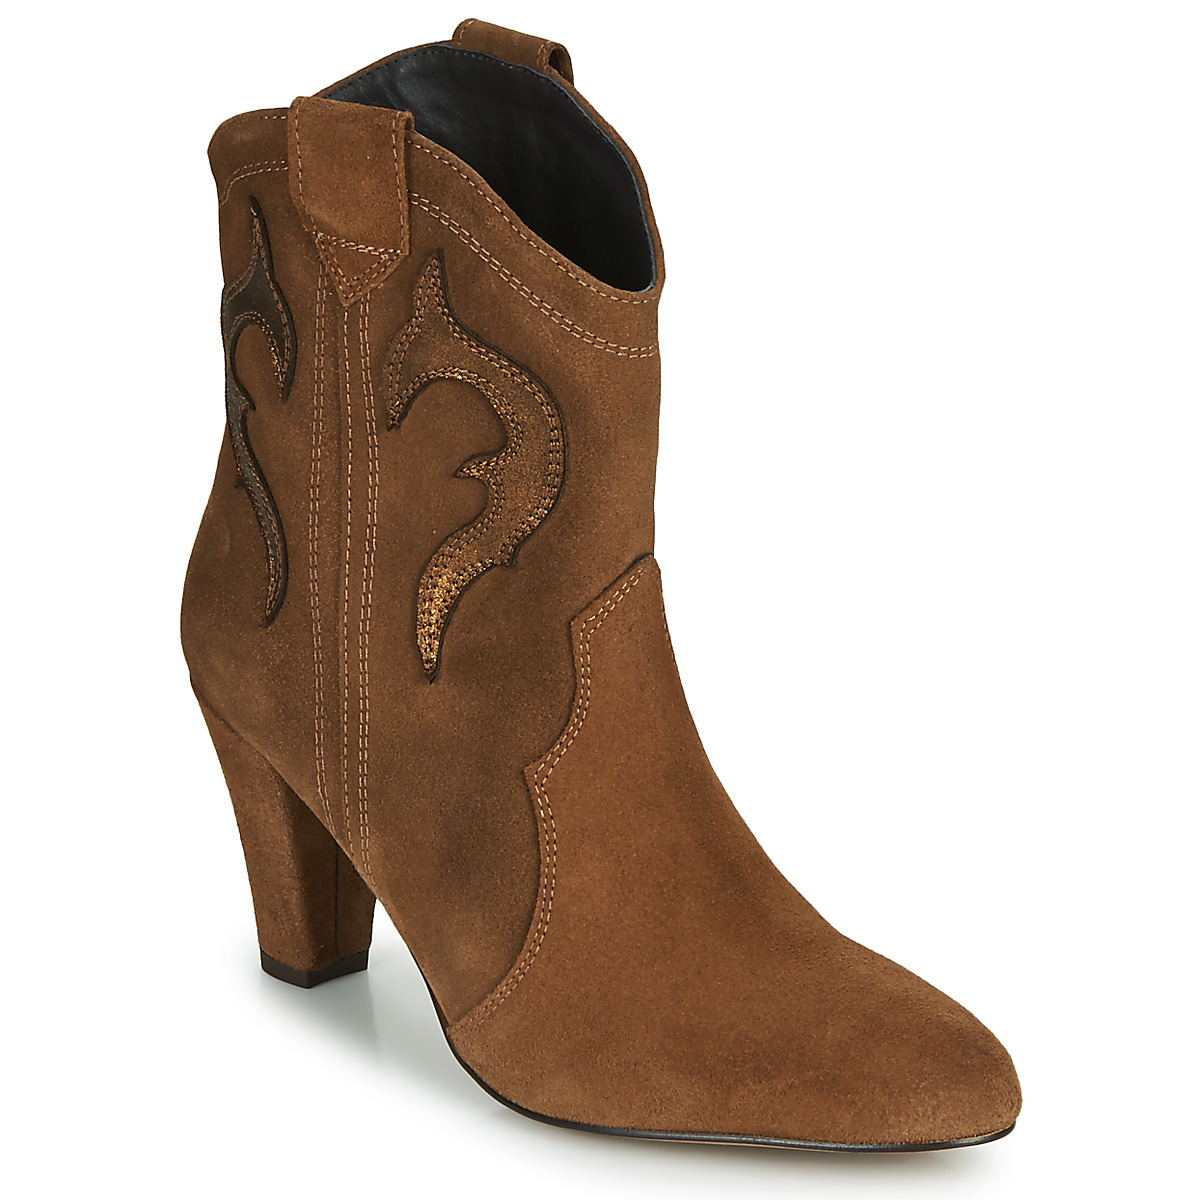 Spartoo - Women's Ankle Boots in Brown - Fericelli GOOFASH